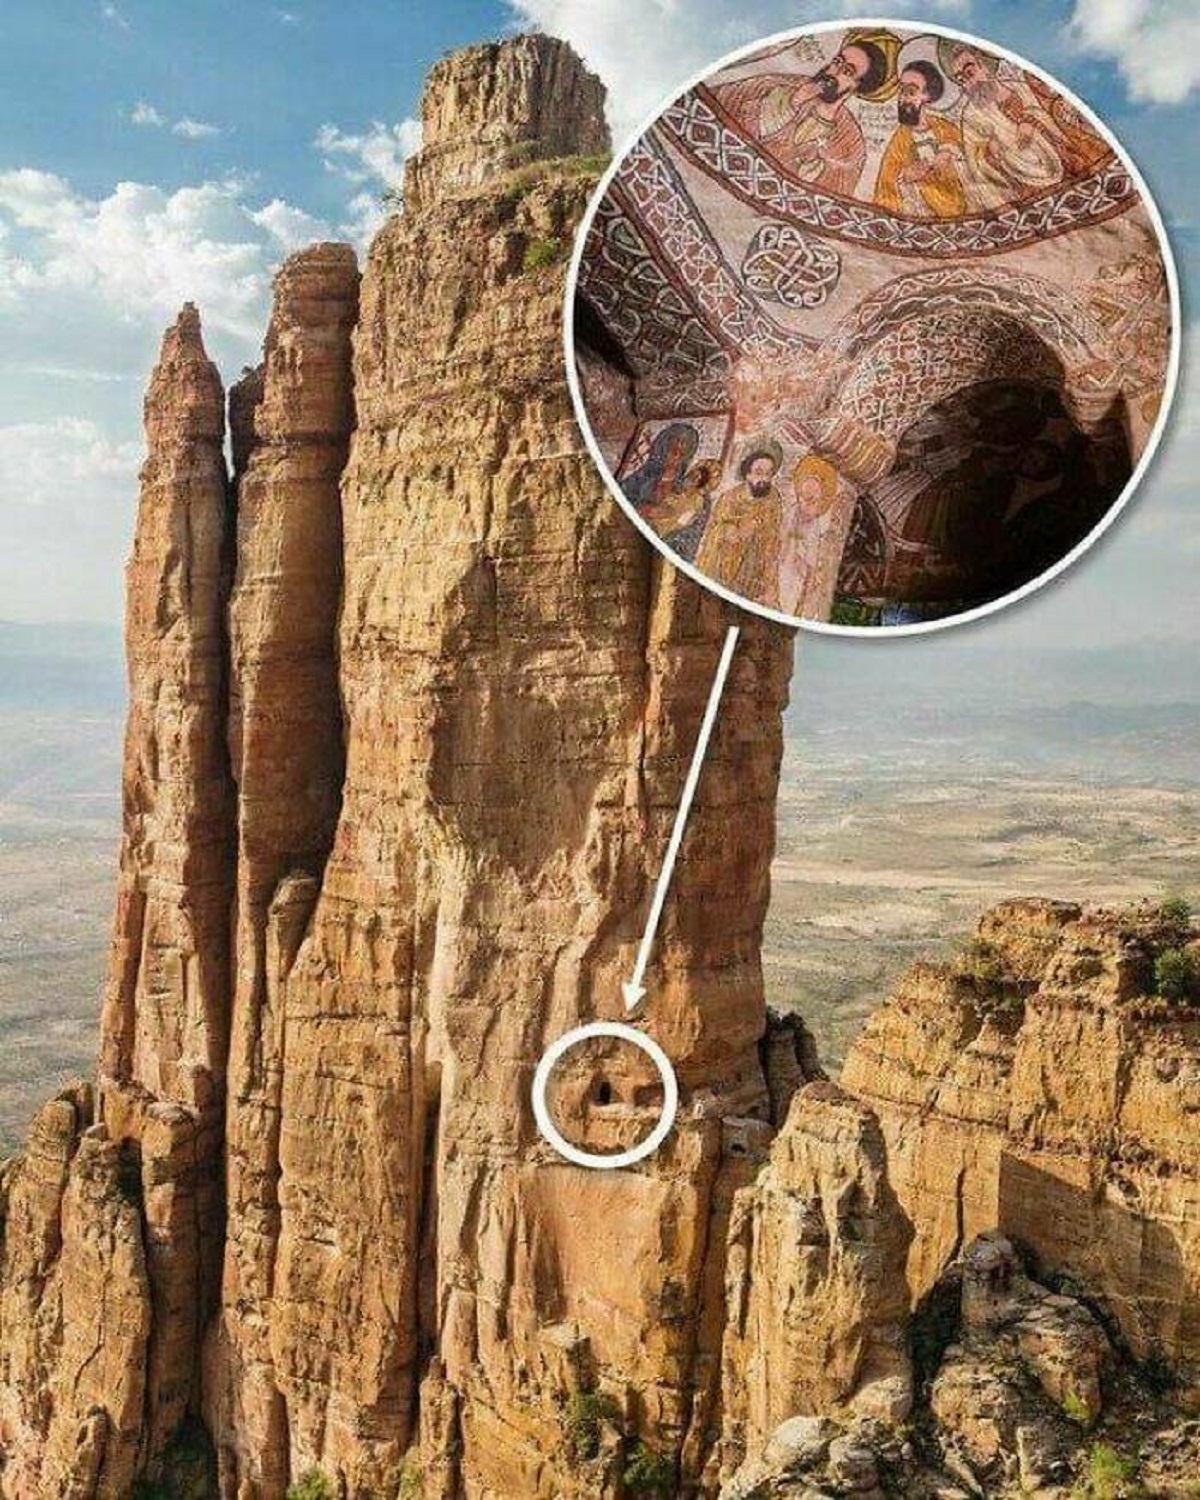 "Abuna Yem’ata Guh In Ethiopia. Situated At A Height Of 8,460 Ft, The Hewn Church Has To Be Climbed On Foot To Reach. It Is Notable For Its Architecture, Dome & Wall Paintings Dating Back To The 5th Century"